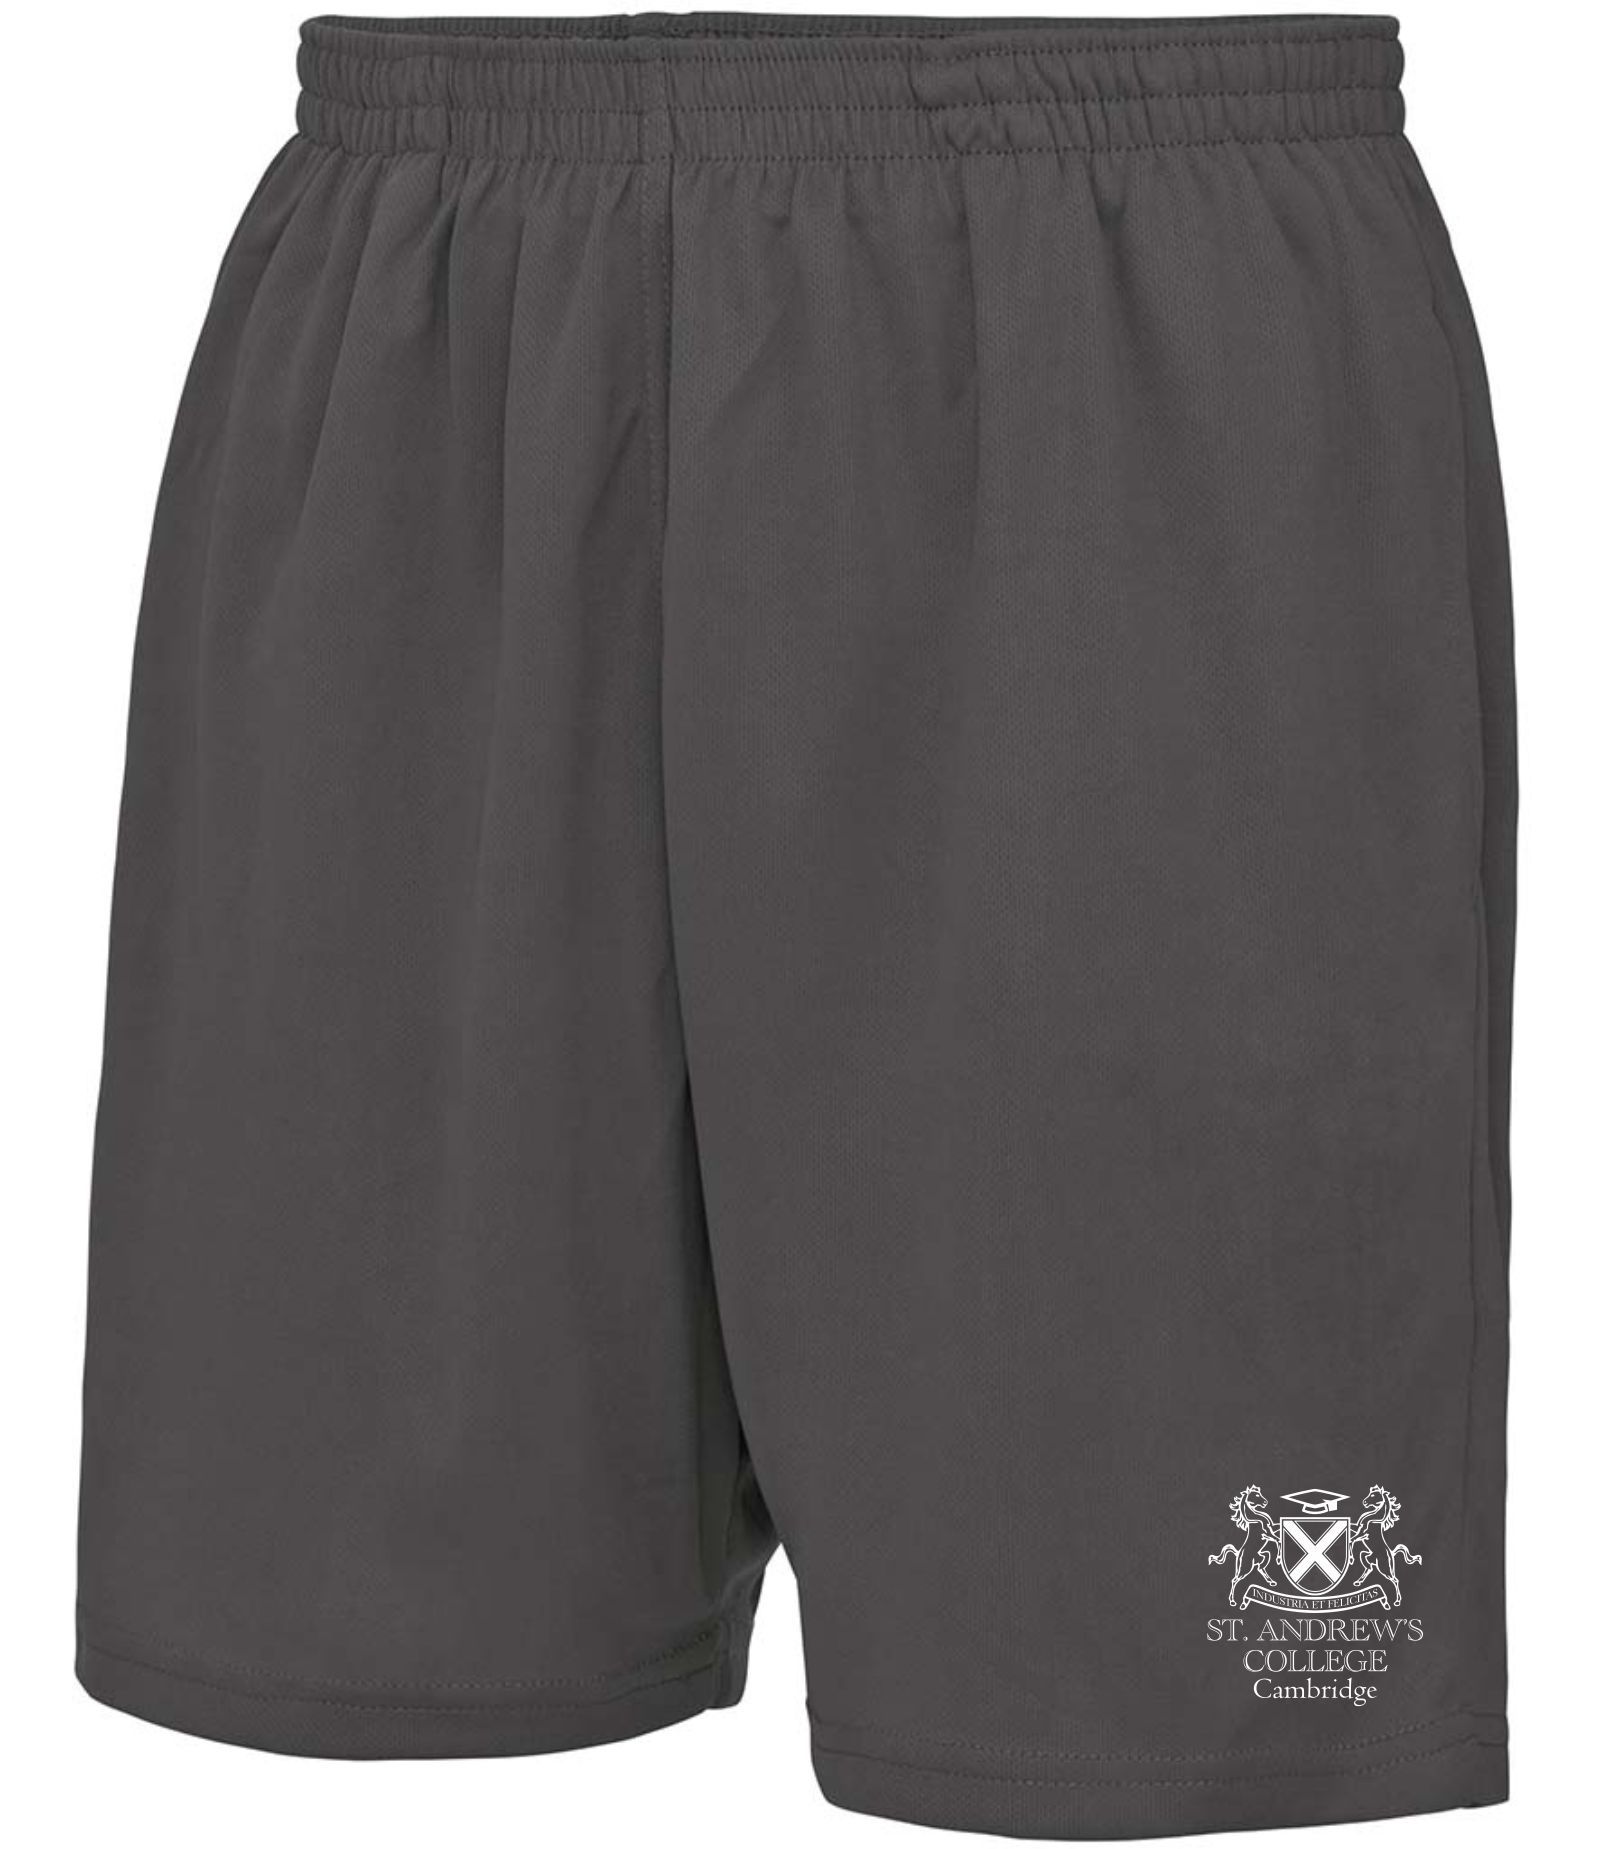 St Andrew's College Cambridge - Cool shorts